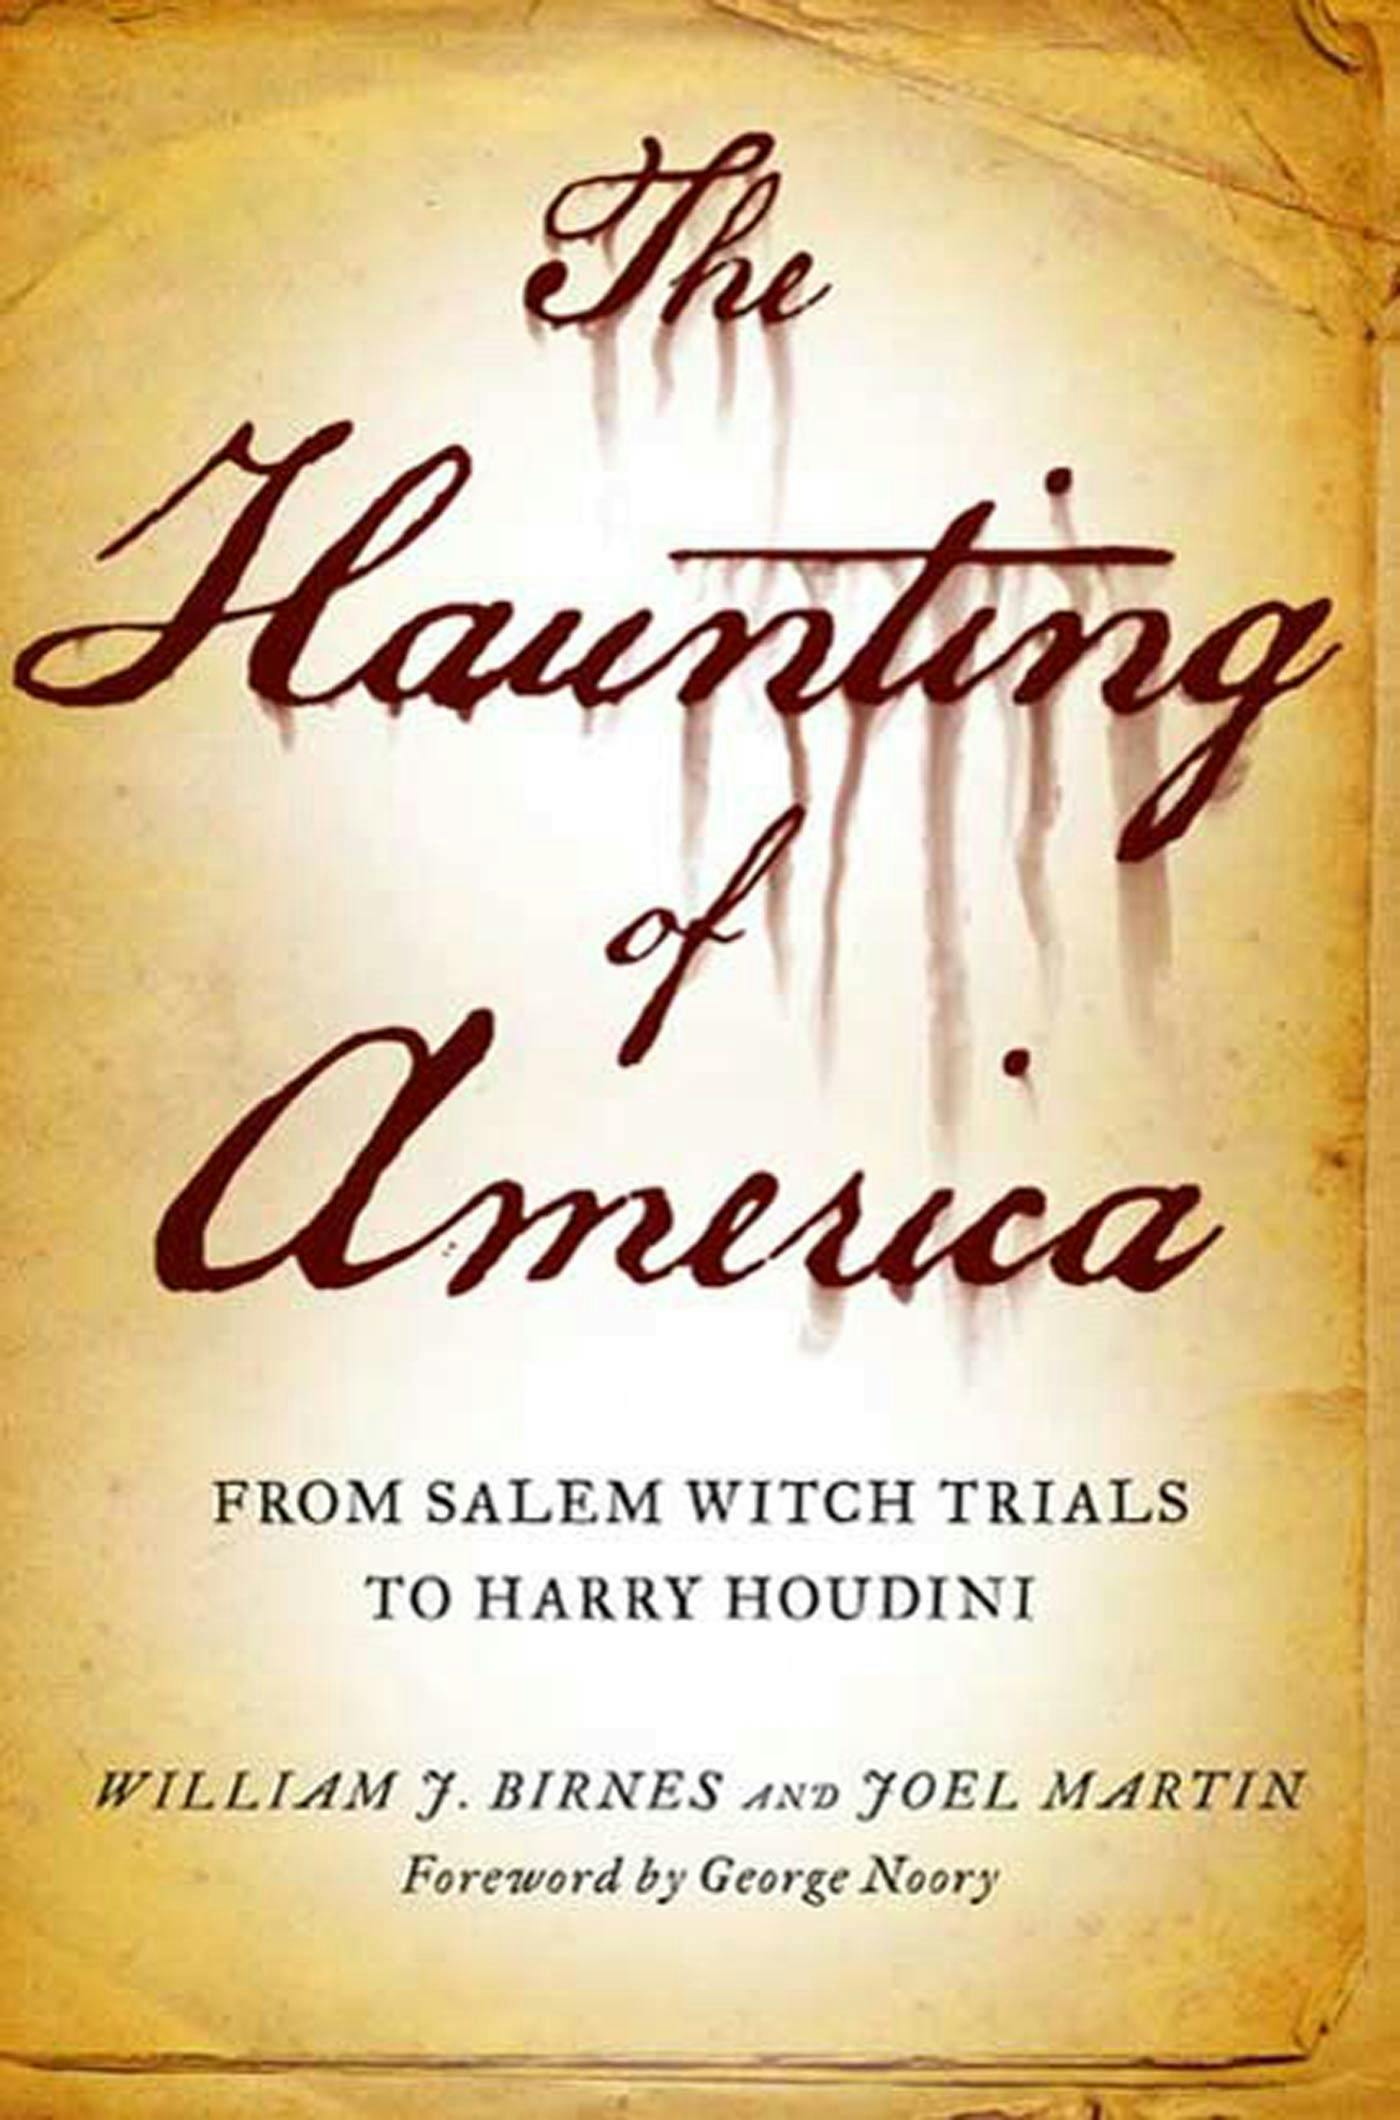 Cover for the book titled as: The Haunting of America